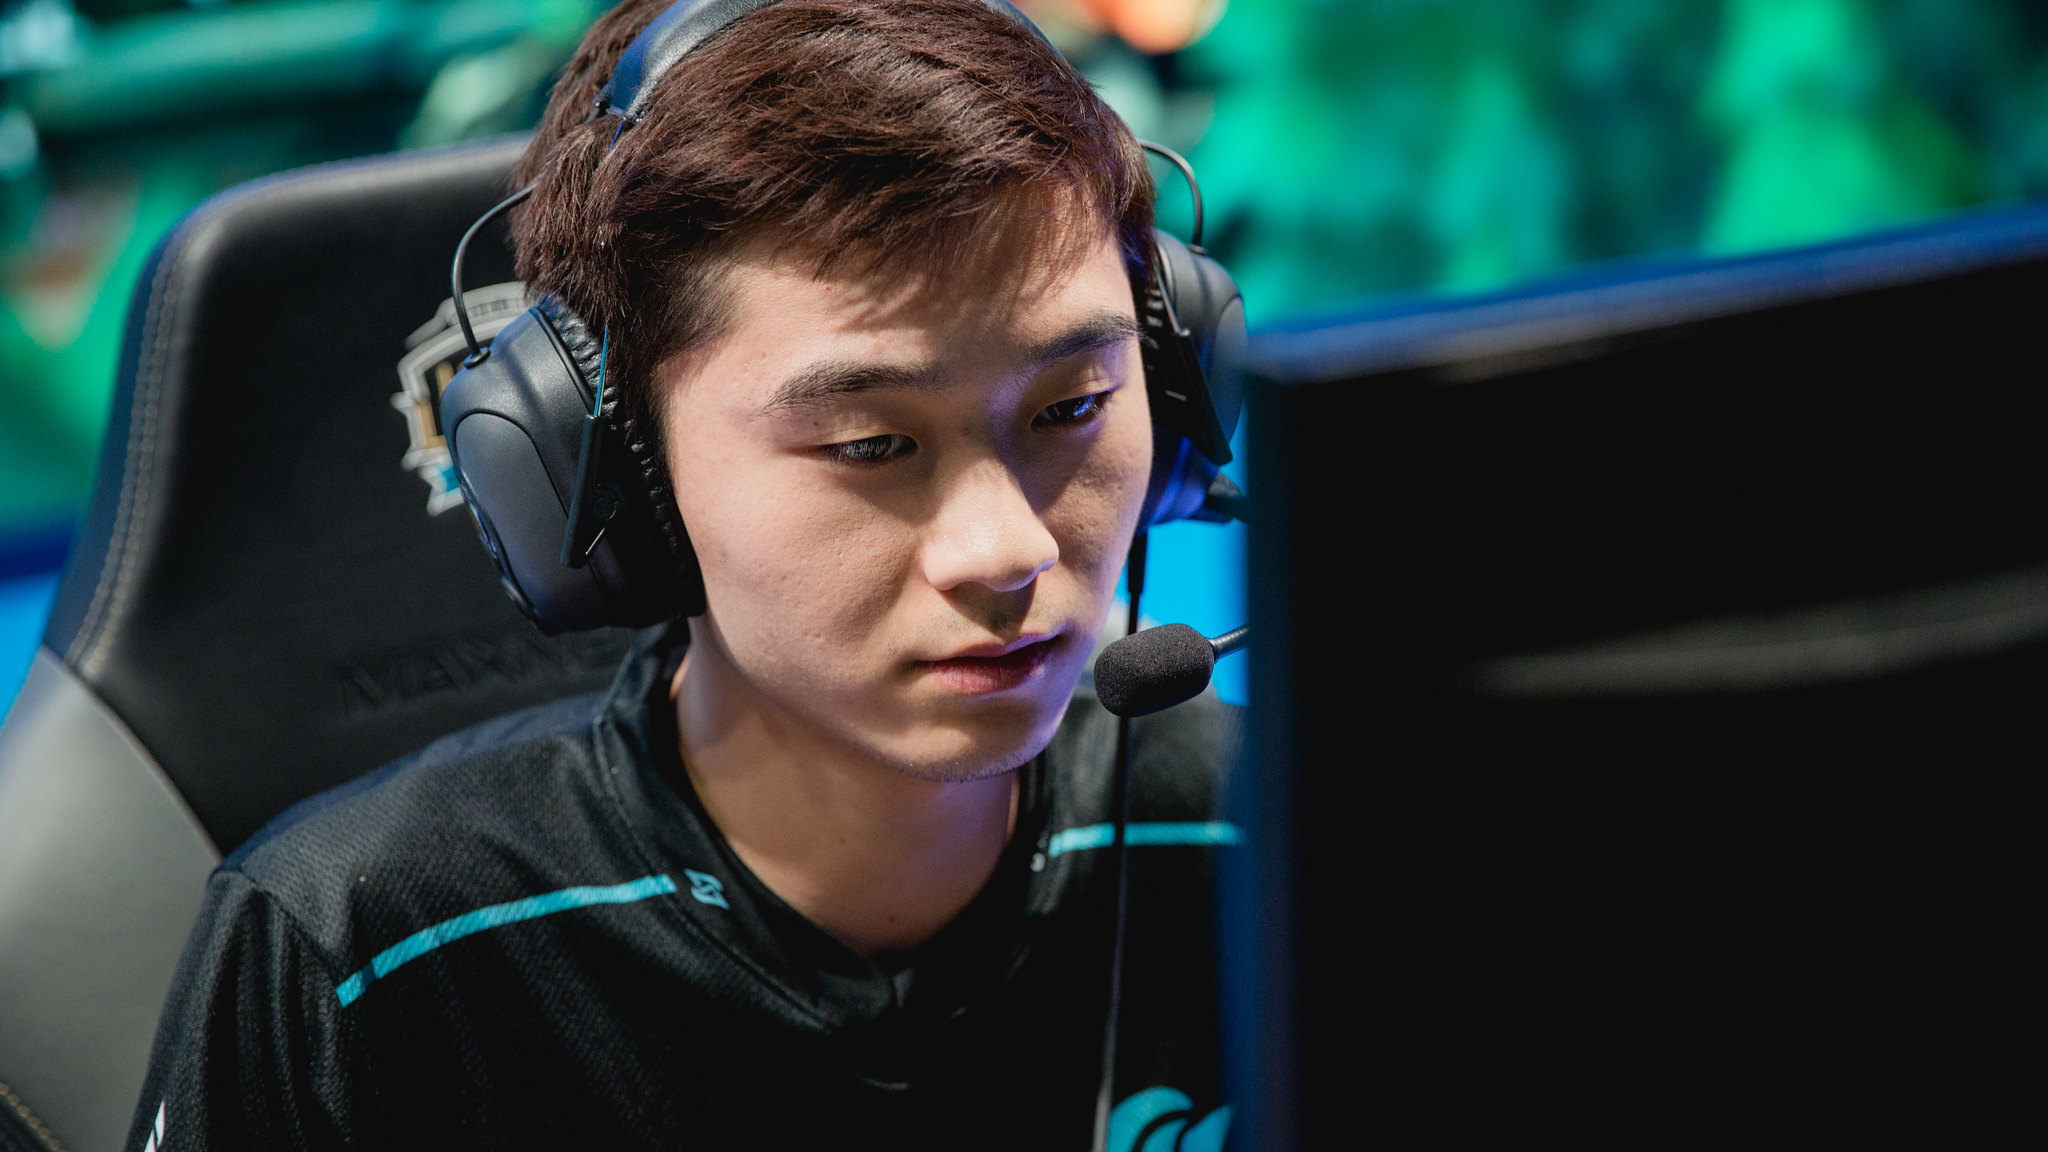 TSM is reportedly trading Smoothie to CLG for Biofrost - Dot Esports